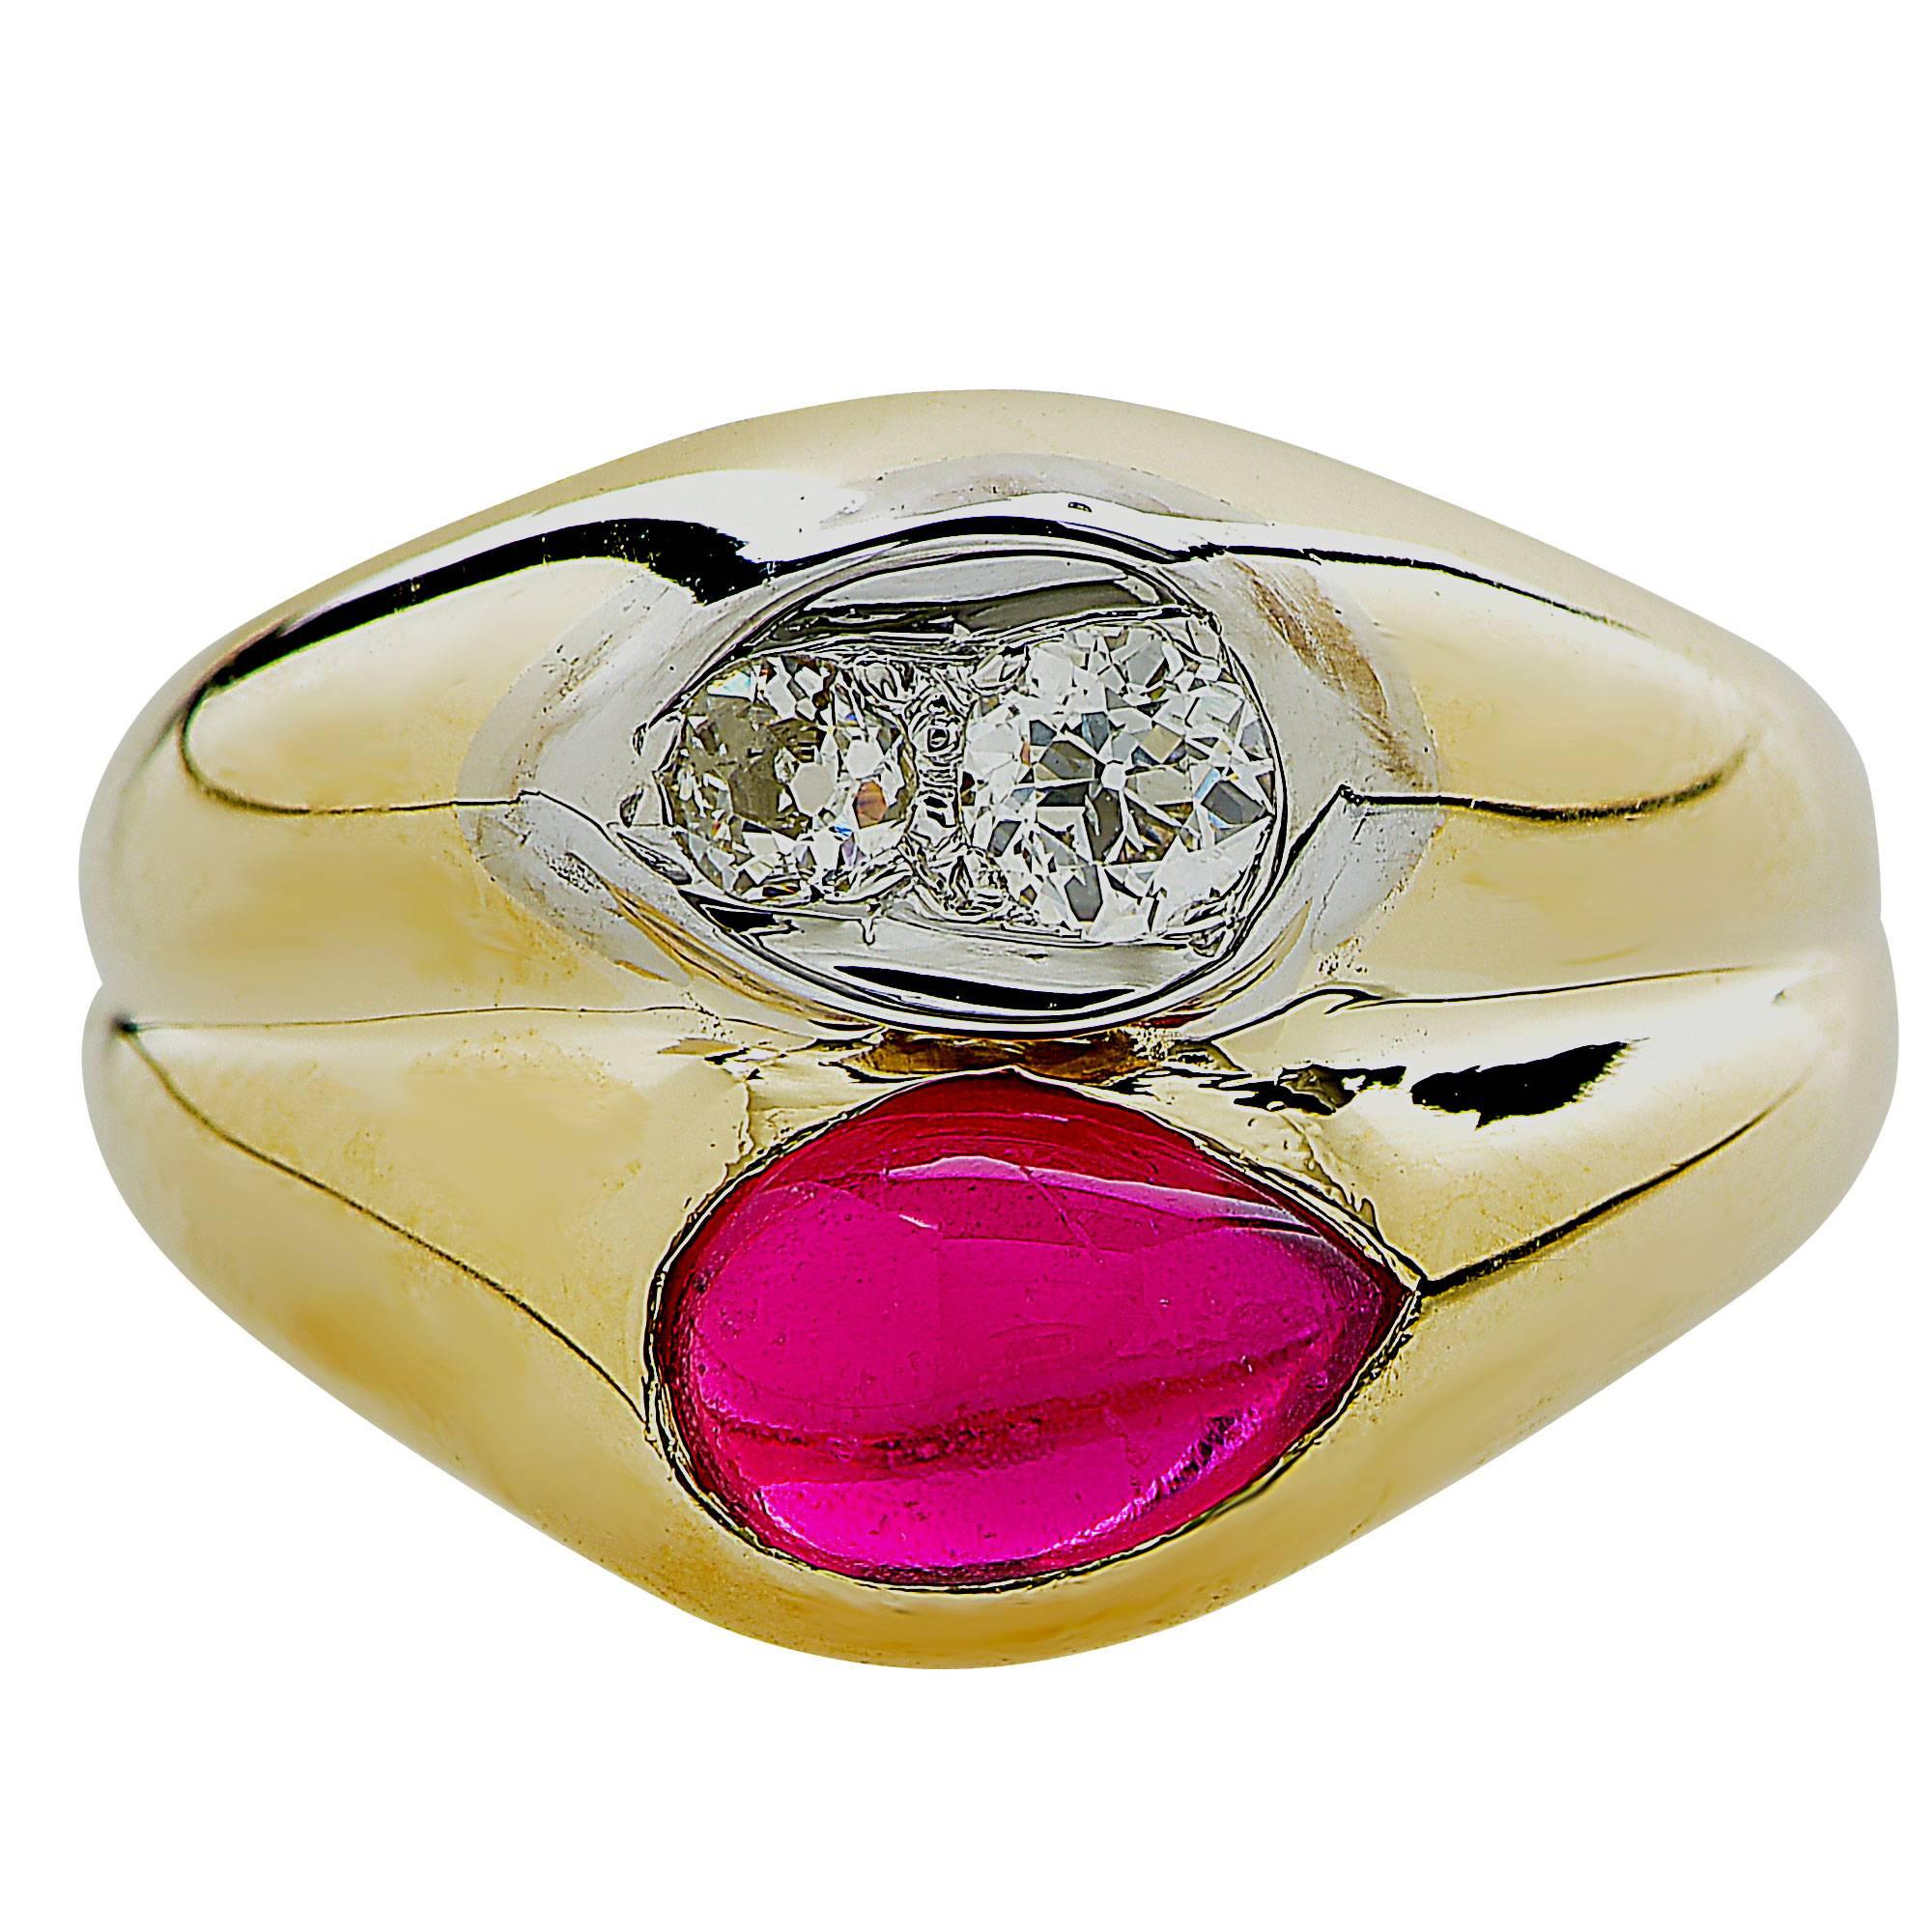 14k yellow gold ring featuring a pear shape cabochon cut synthetic ruby weighing approximately 1.20cts and two old European cut diamonds weighing approximately .30cts.

Metal weight: 8.70 grams

This ruby and diamond ring is accompanied by a